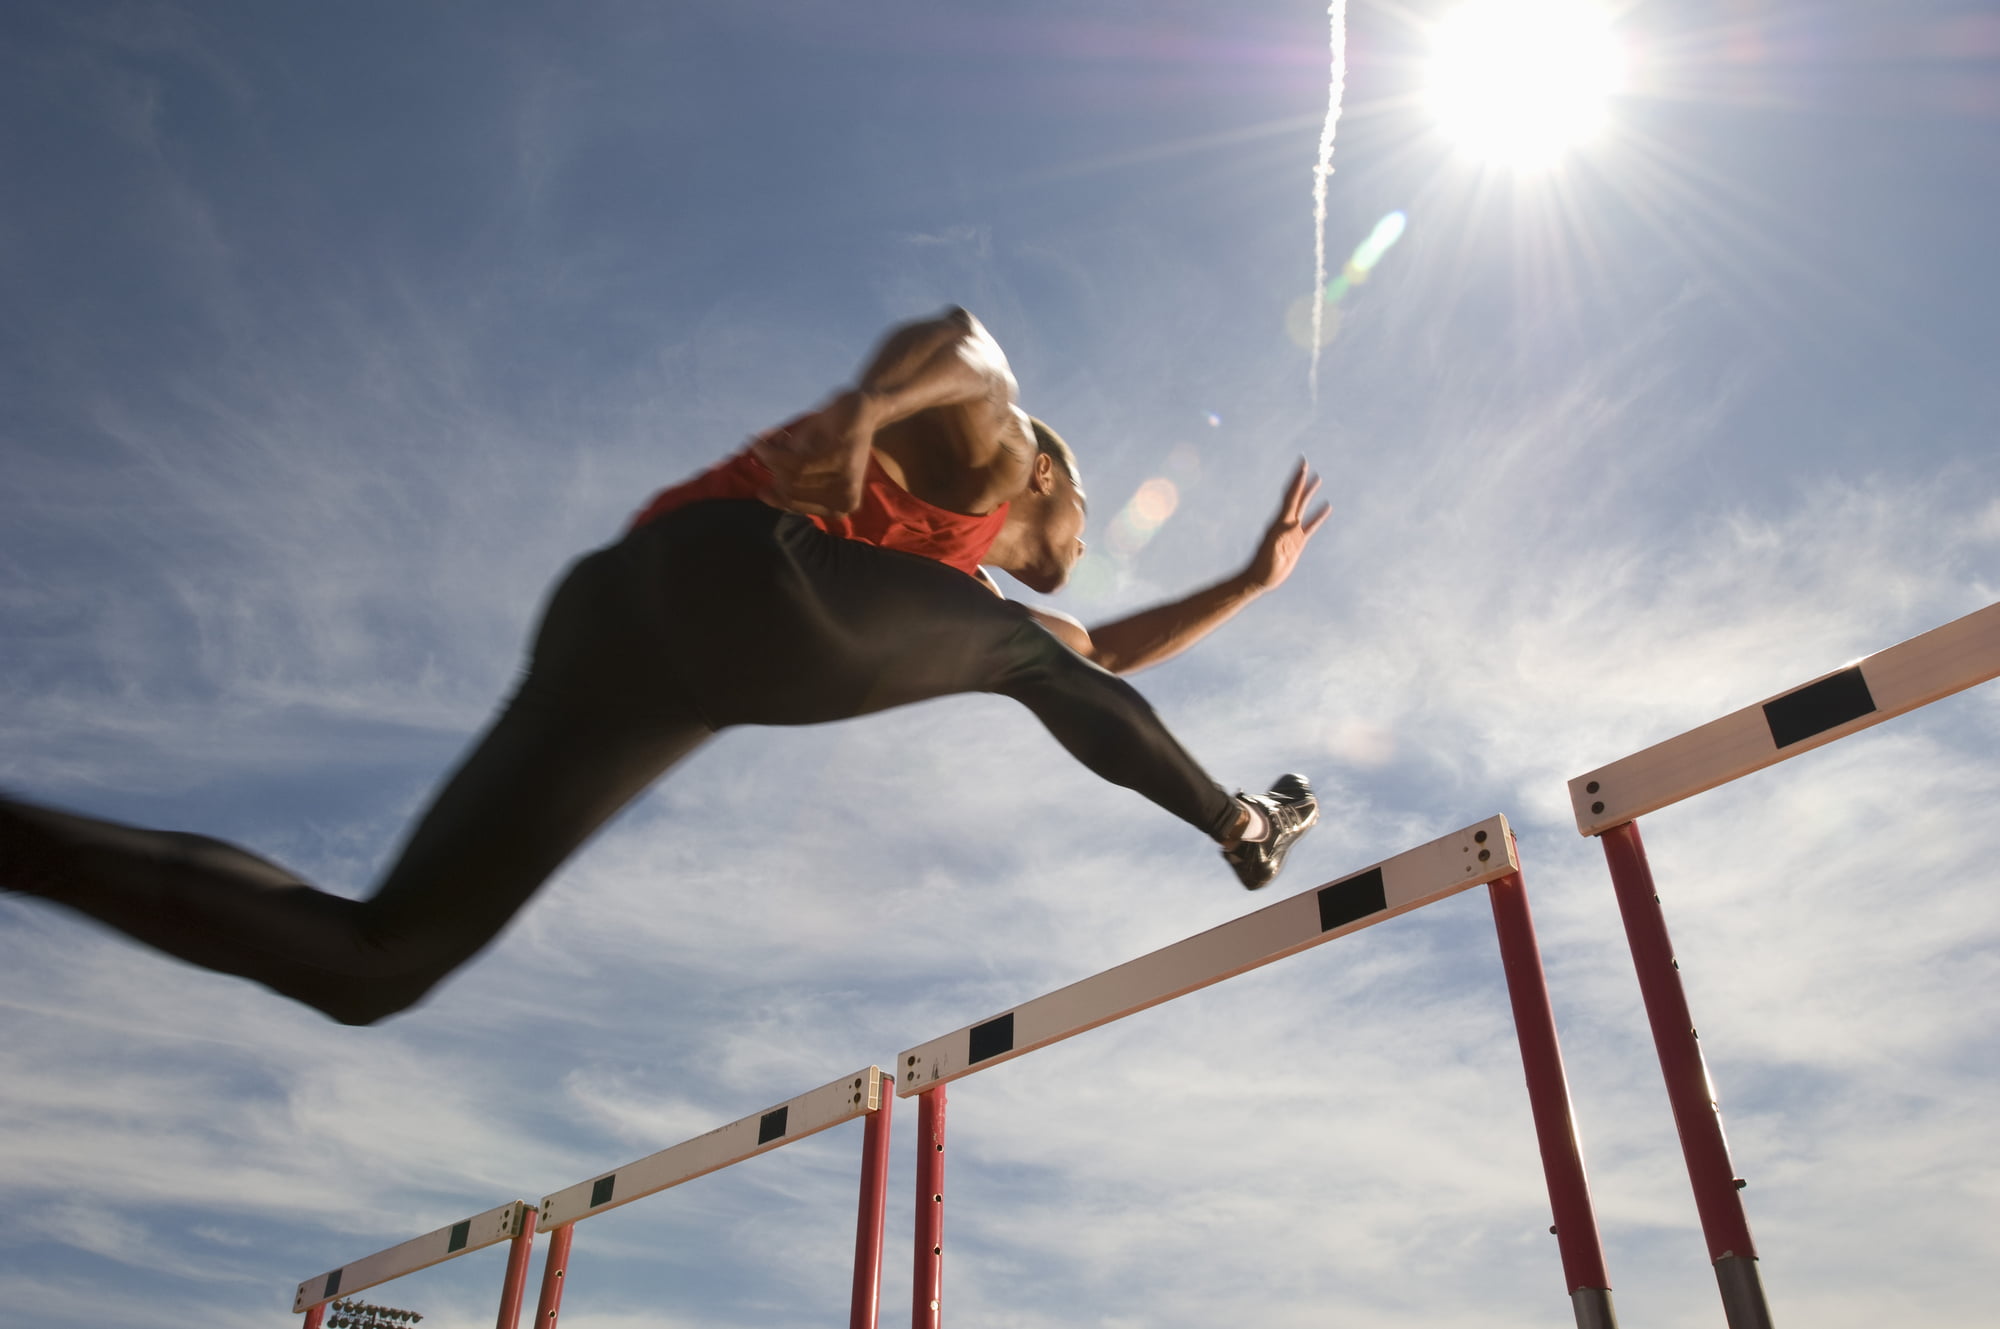 BITCOIN PRICE CLOSING ABOVE THIS “HURDLE” SENDS BULLS “OFF TO THE RACES”